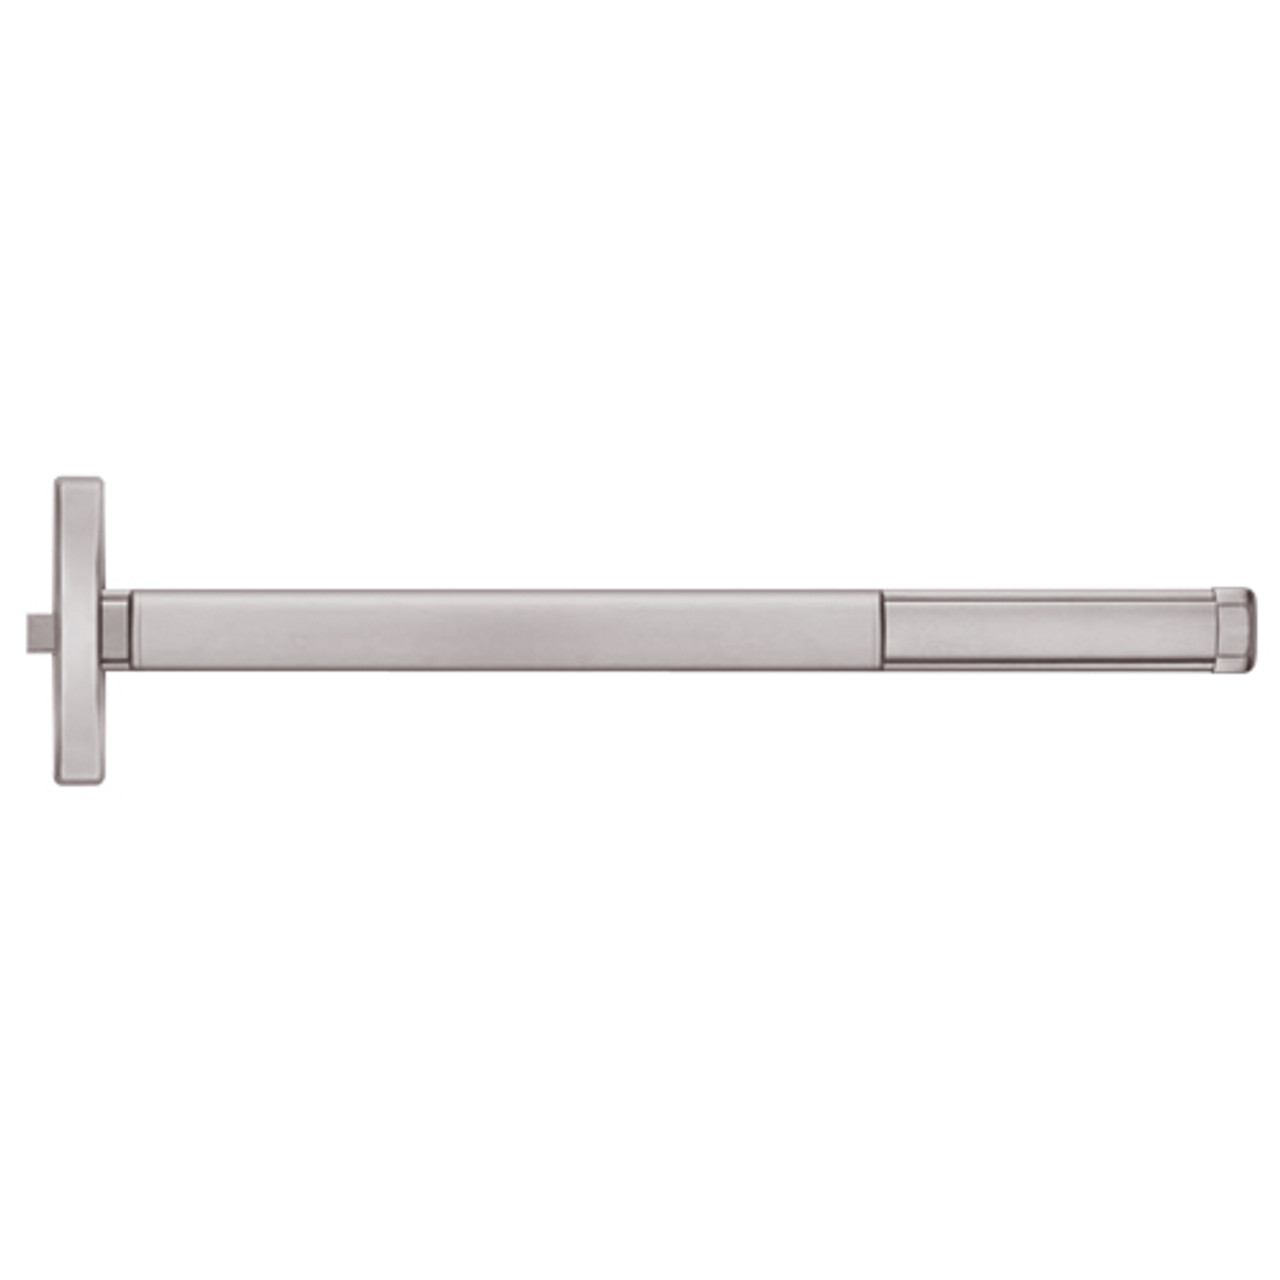 DEFL2403-628-36 PHI 2400 Series Fire Rated Apex Rim Exit Device with Delayed Egress Prepped for Key Retracts Latchbolt in Satin Aluminum Finish